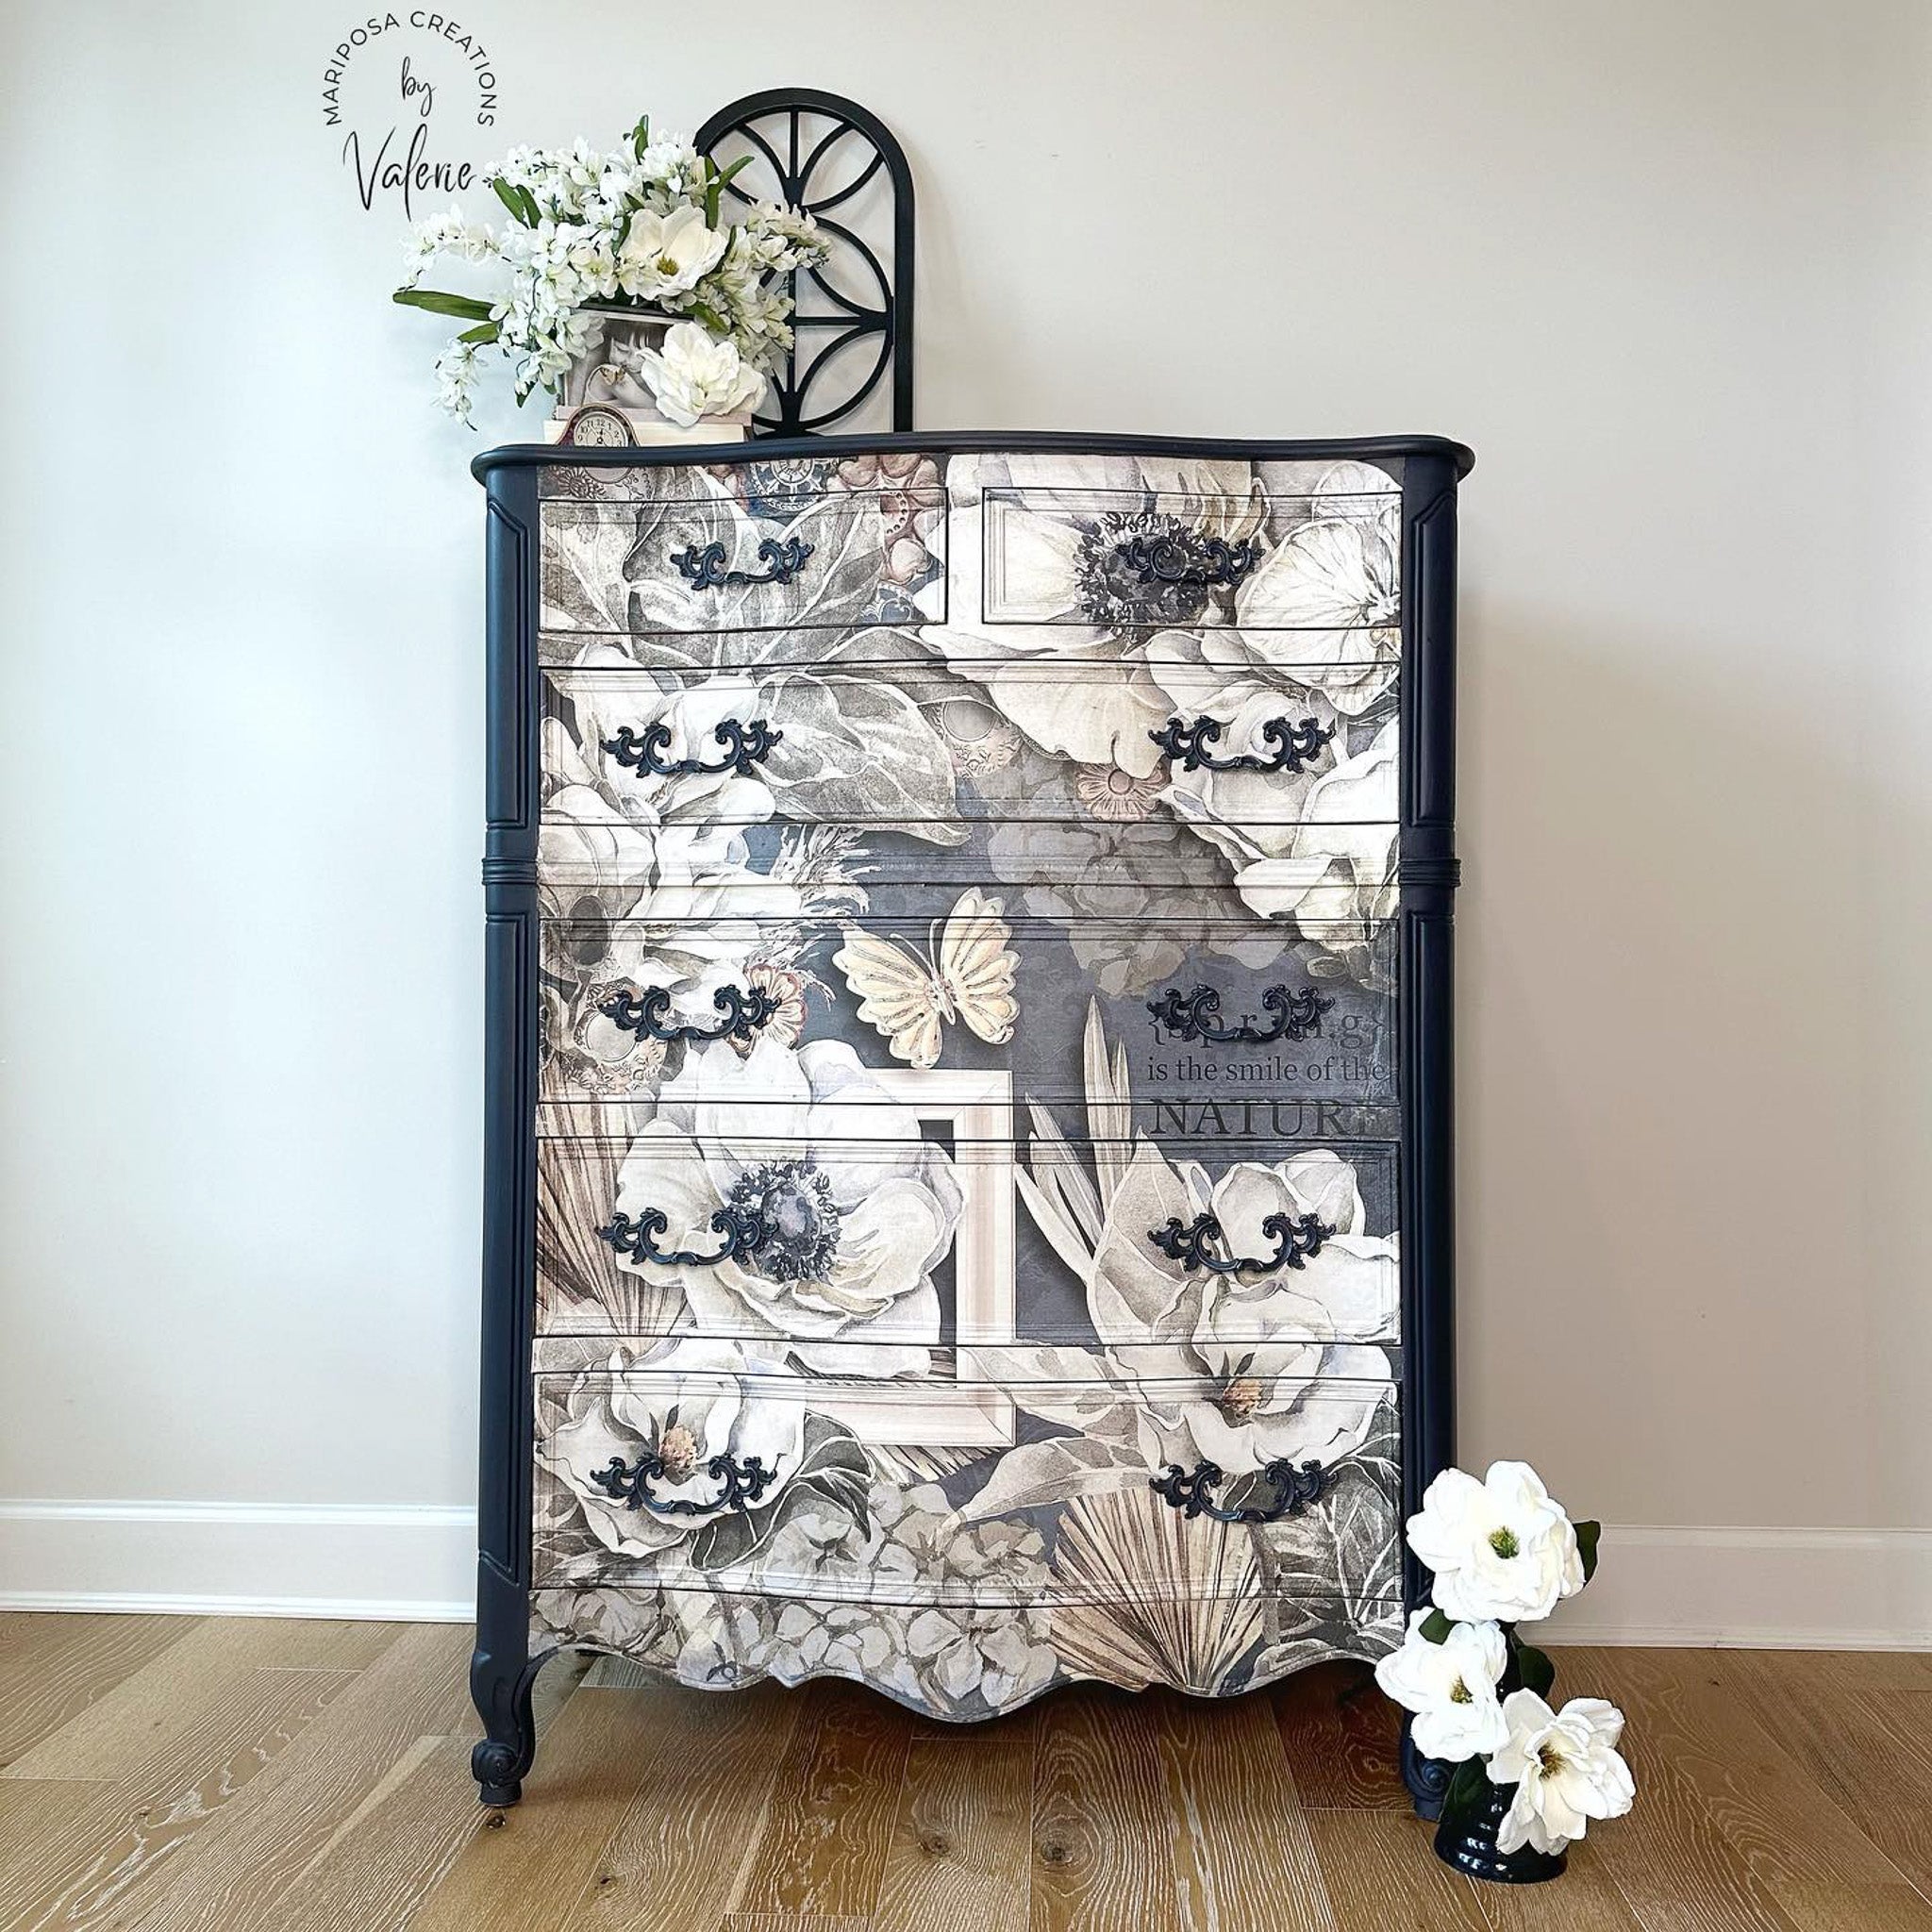 A vintage chest dresser refurbished by Mariposa Creations by Valerie is painted navy blue and features Decoupage Queen's Sugar Magnolia rice paper on the whole front side.